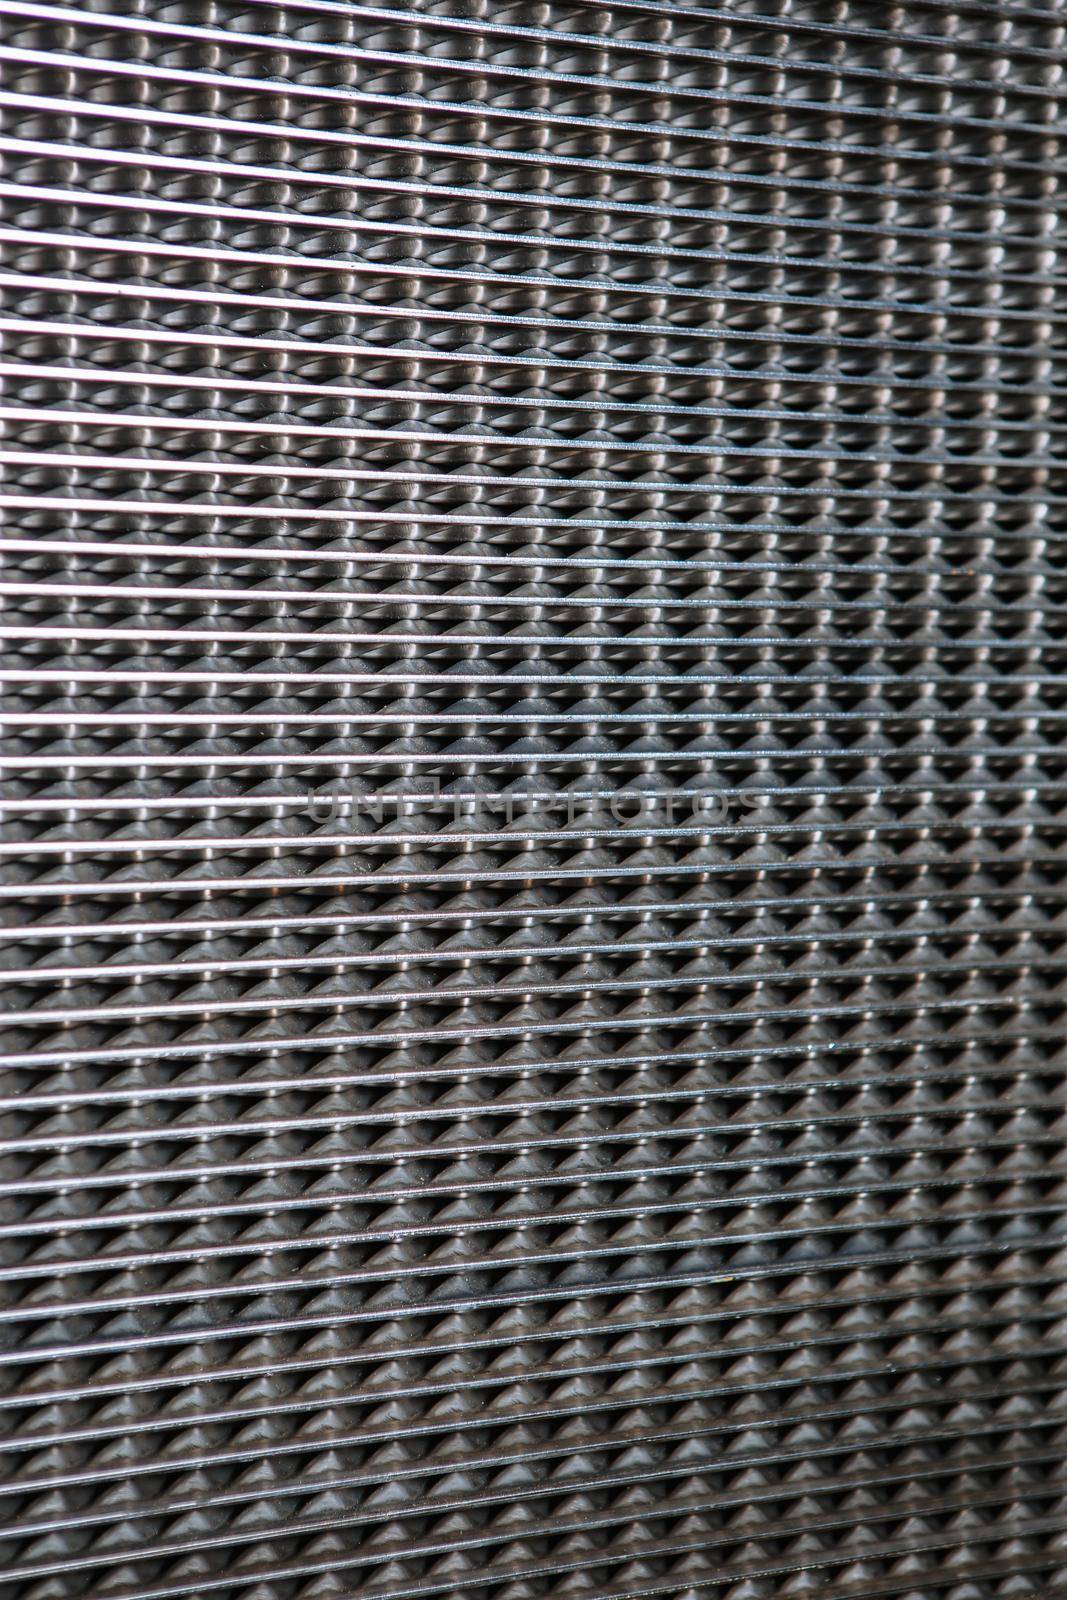 A metal heat exchanger grid consisting of small cells. Pattern by deandy